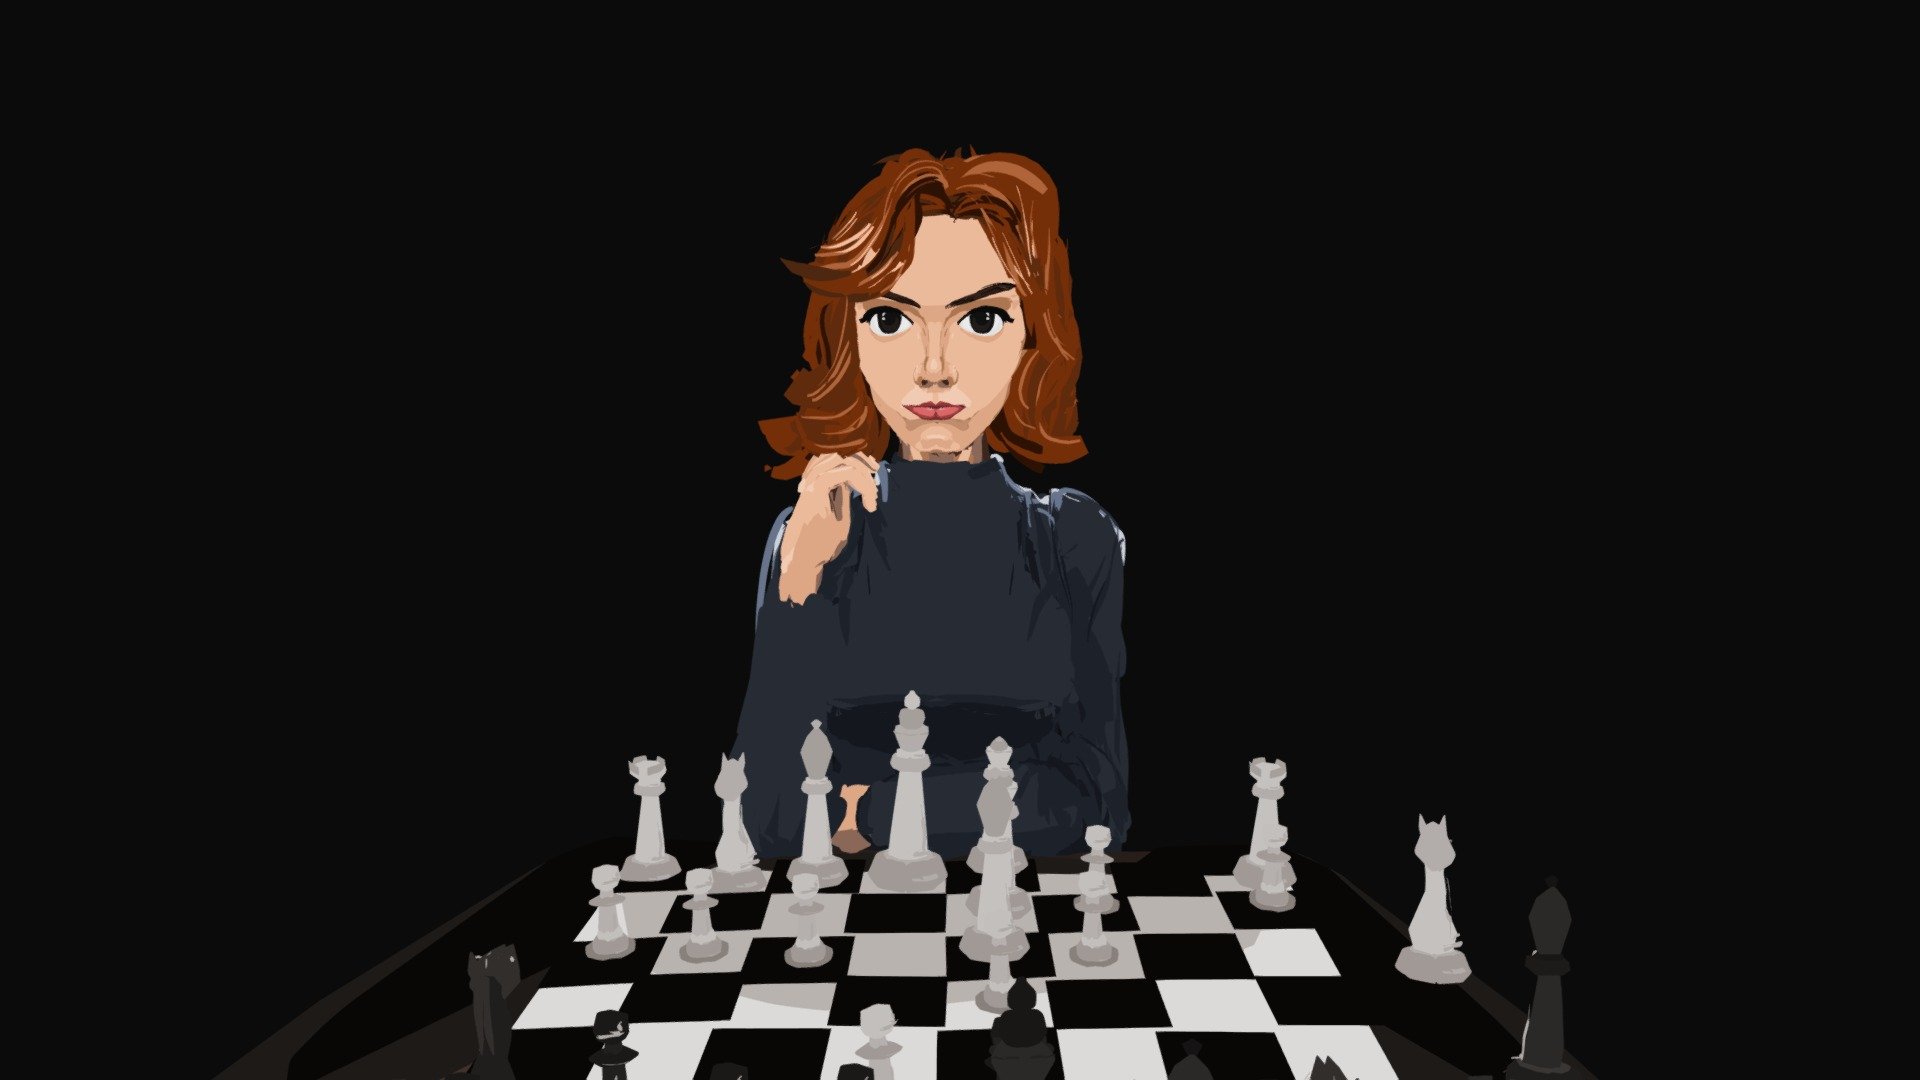 The Queen's Gambit Chess Gameplay (Netflix) Android Ios 